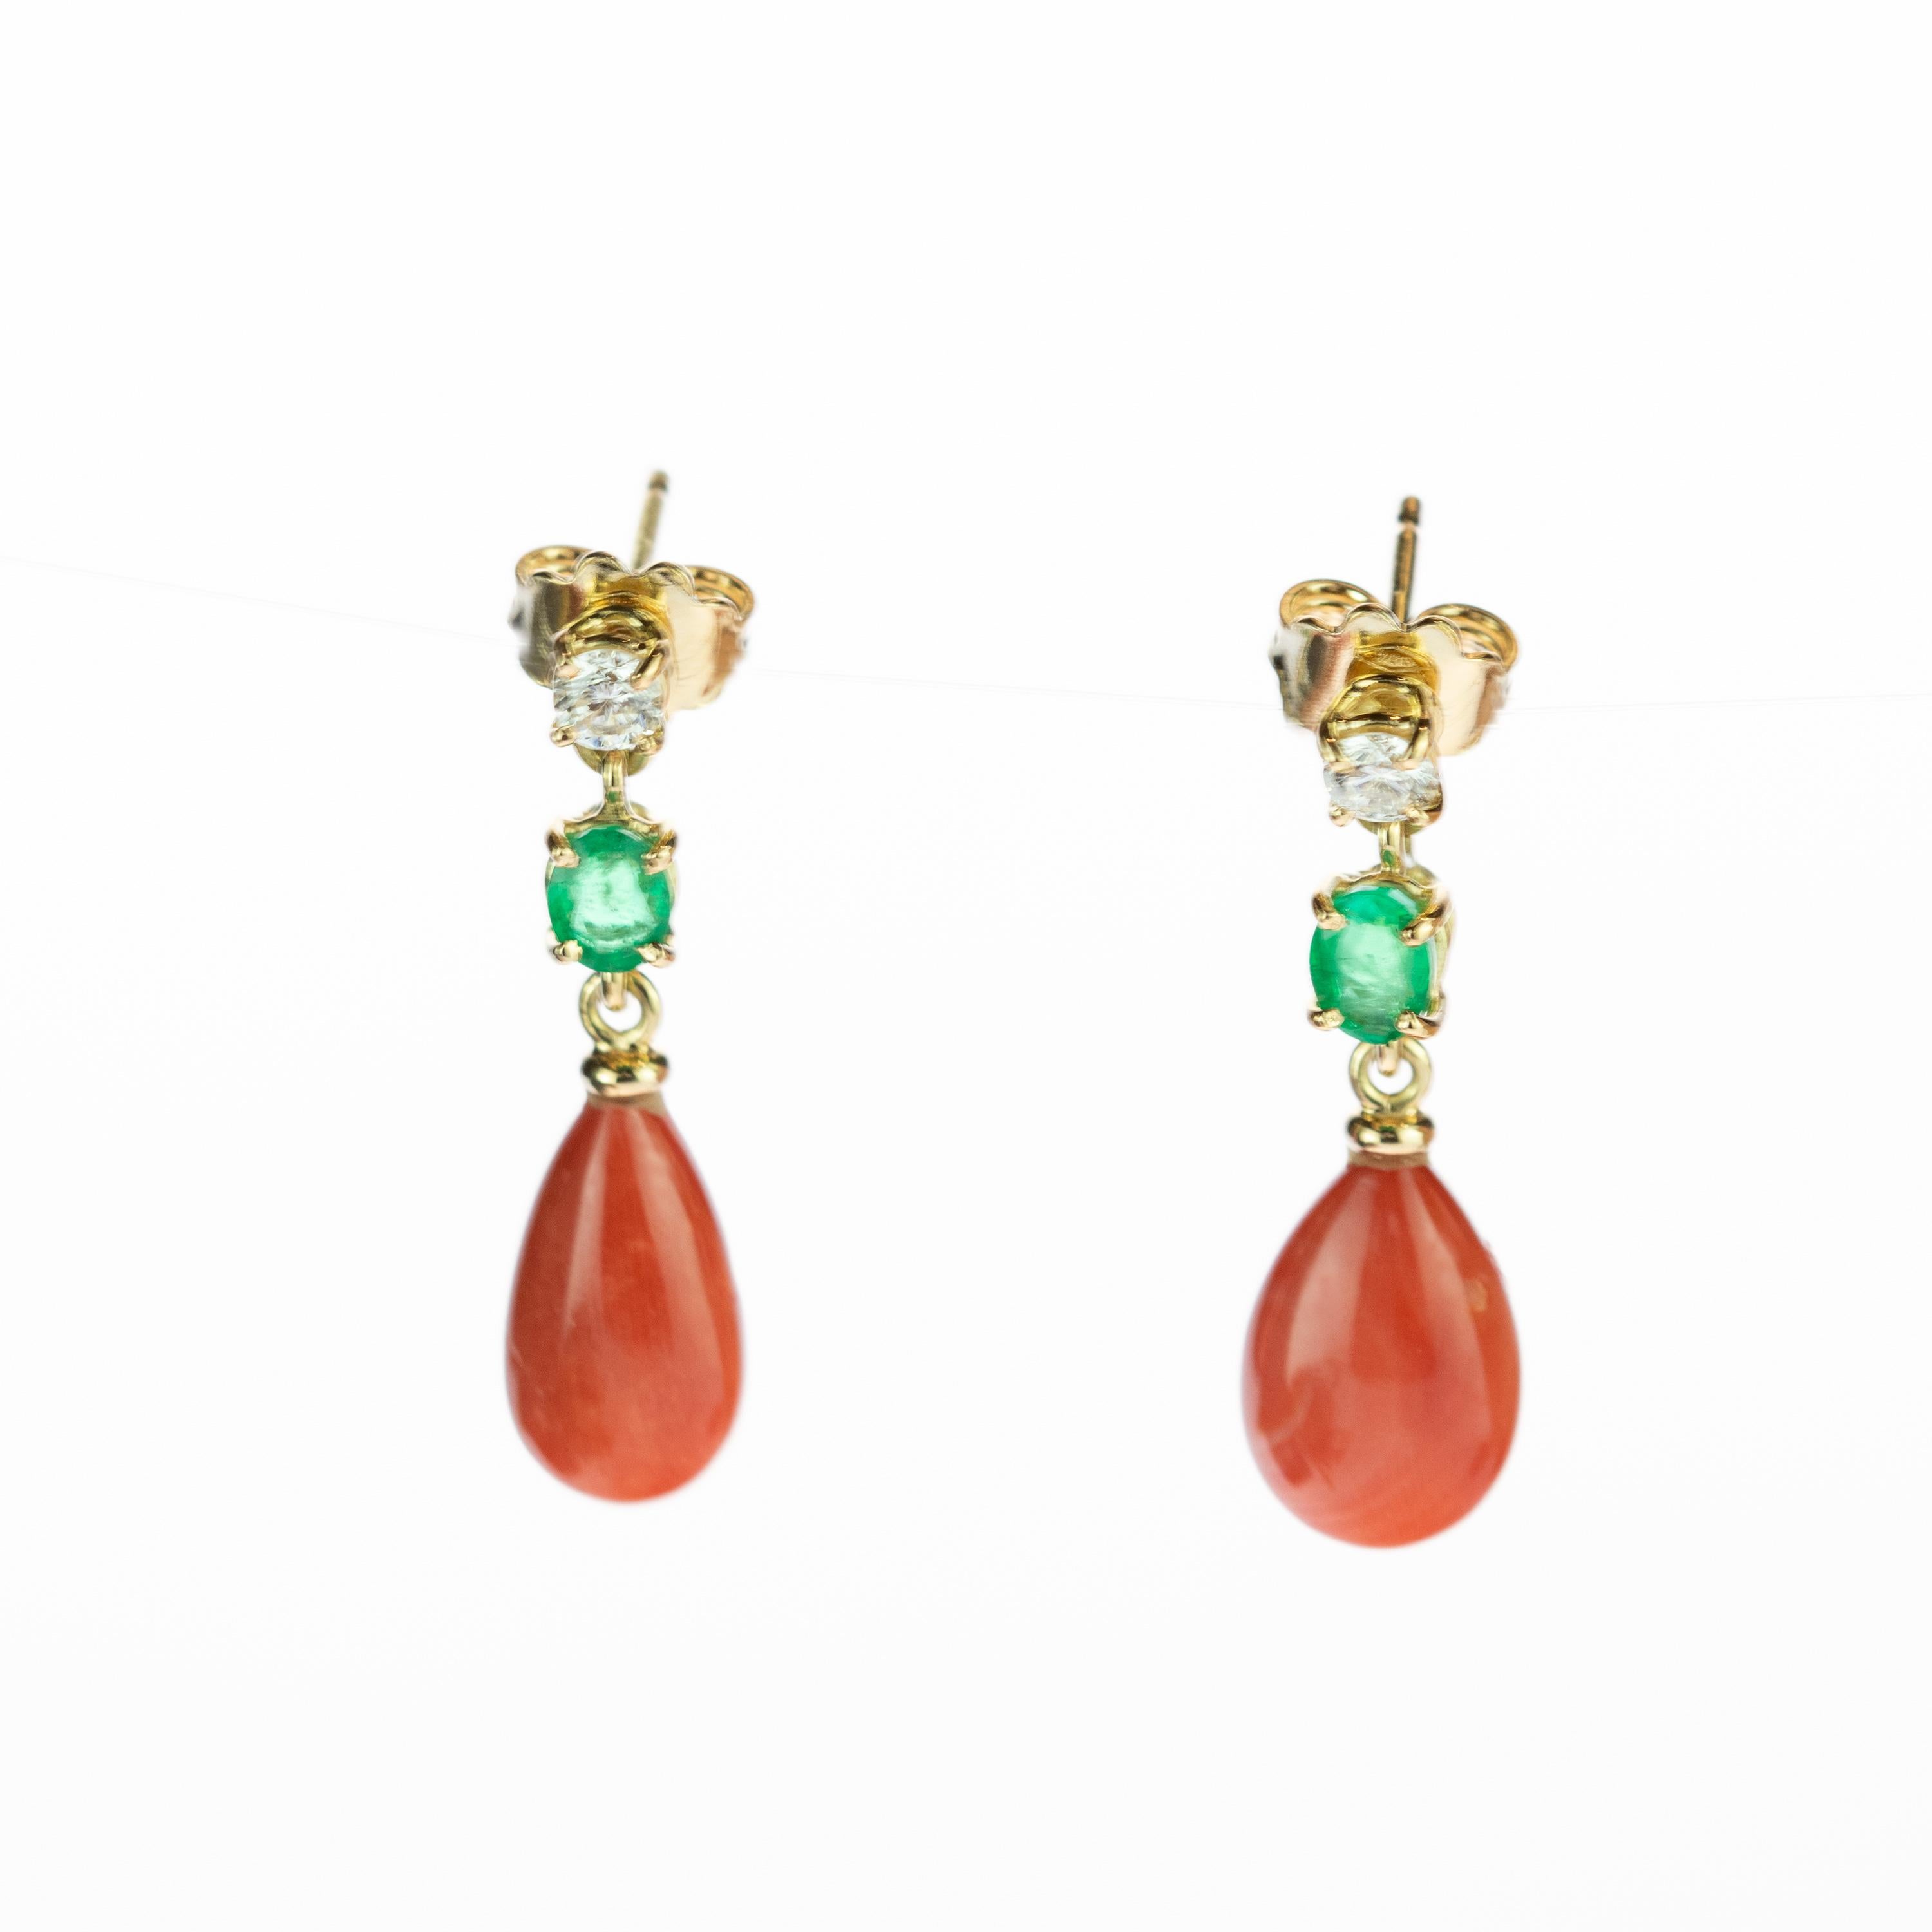 Gorgeous and glamorous bright salmon coral bold tears with diamonds and emerald earrings surrounded by delicate 18 karat yellow gold details. Drop and cocktail earrings evoking all the italian tradition resulting in a stunning masterpiece with an